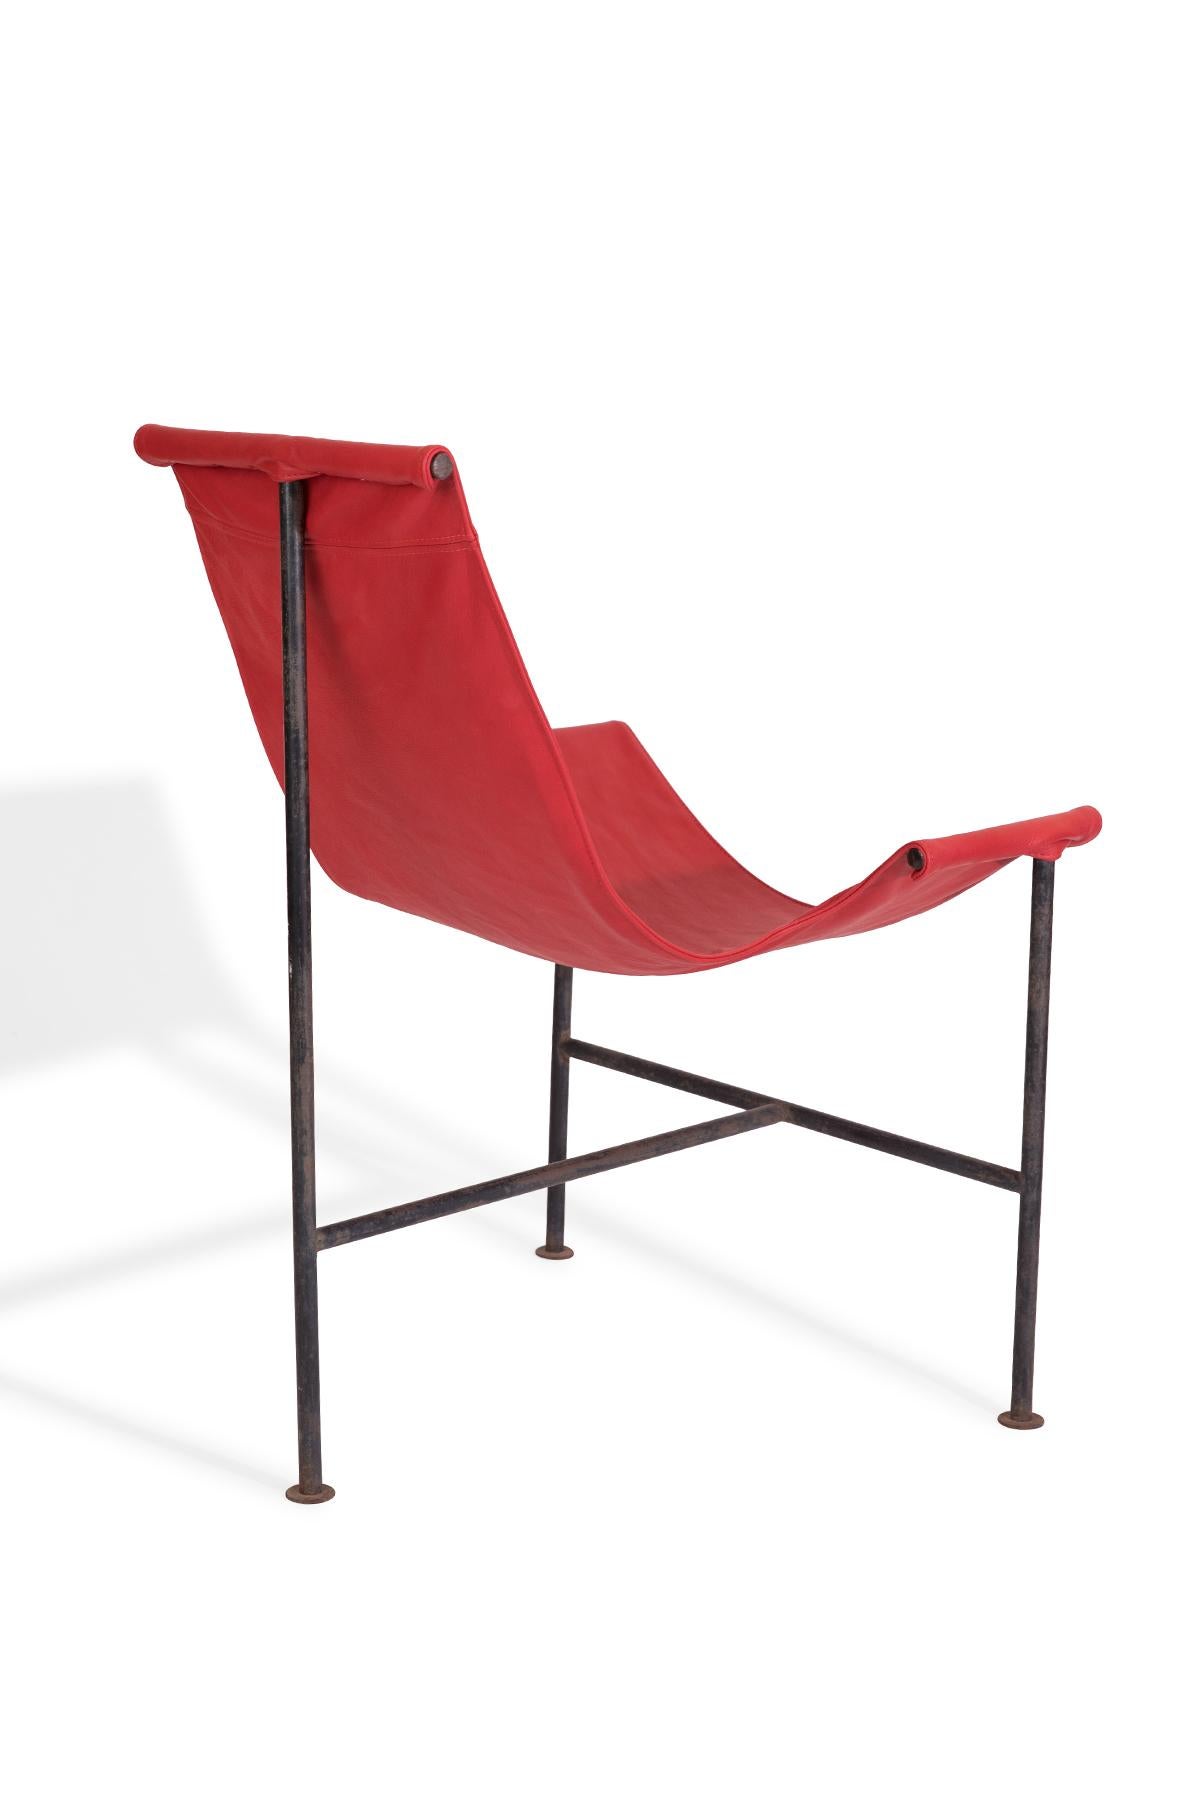 Mexican Sling Chairs After Giorgio Belloli in Red Leather and Iron